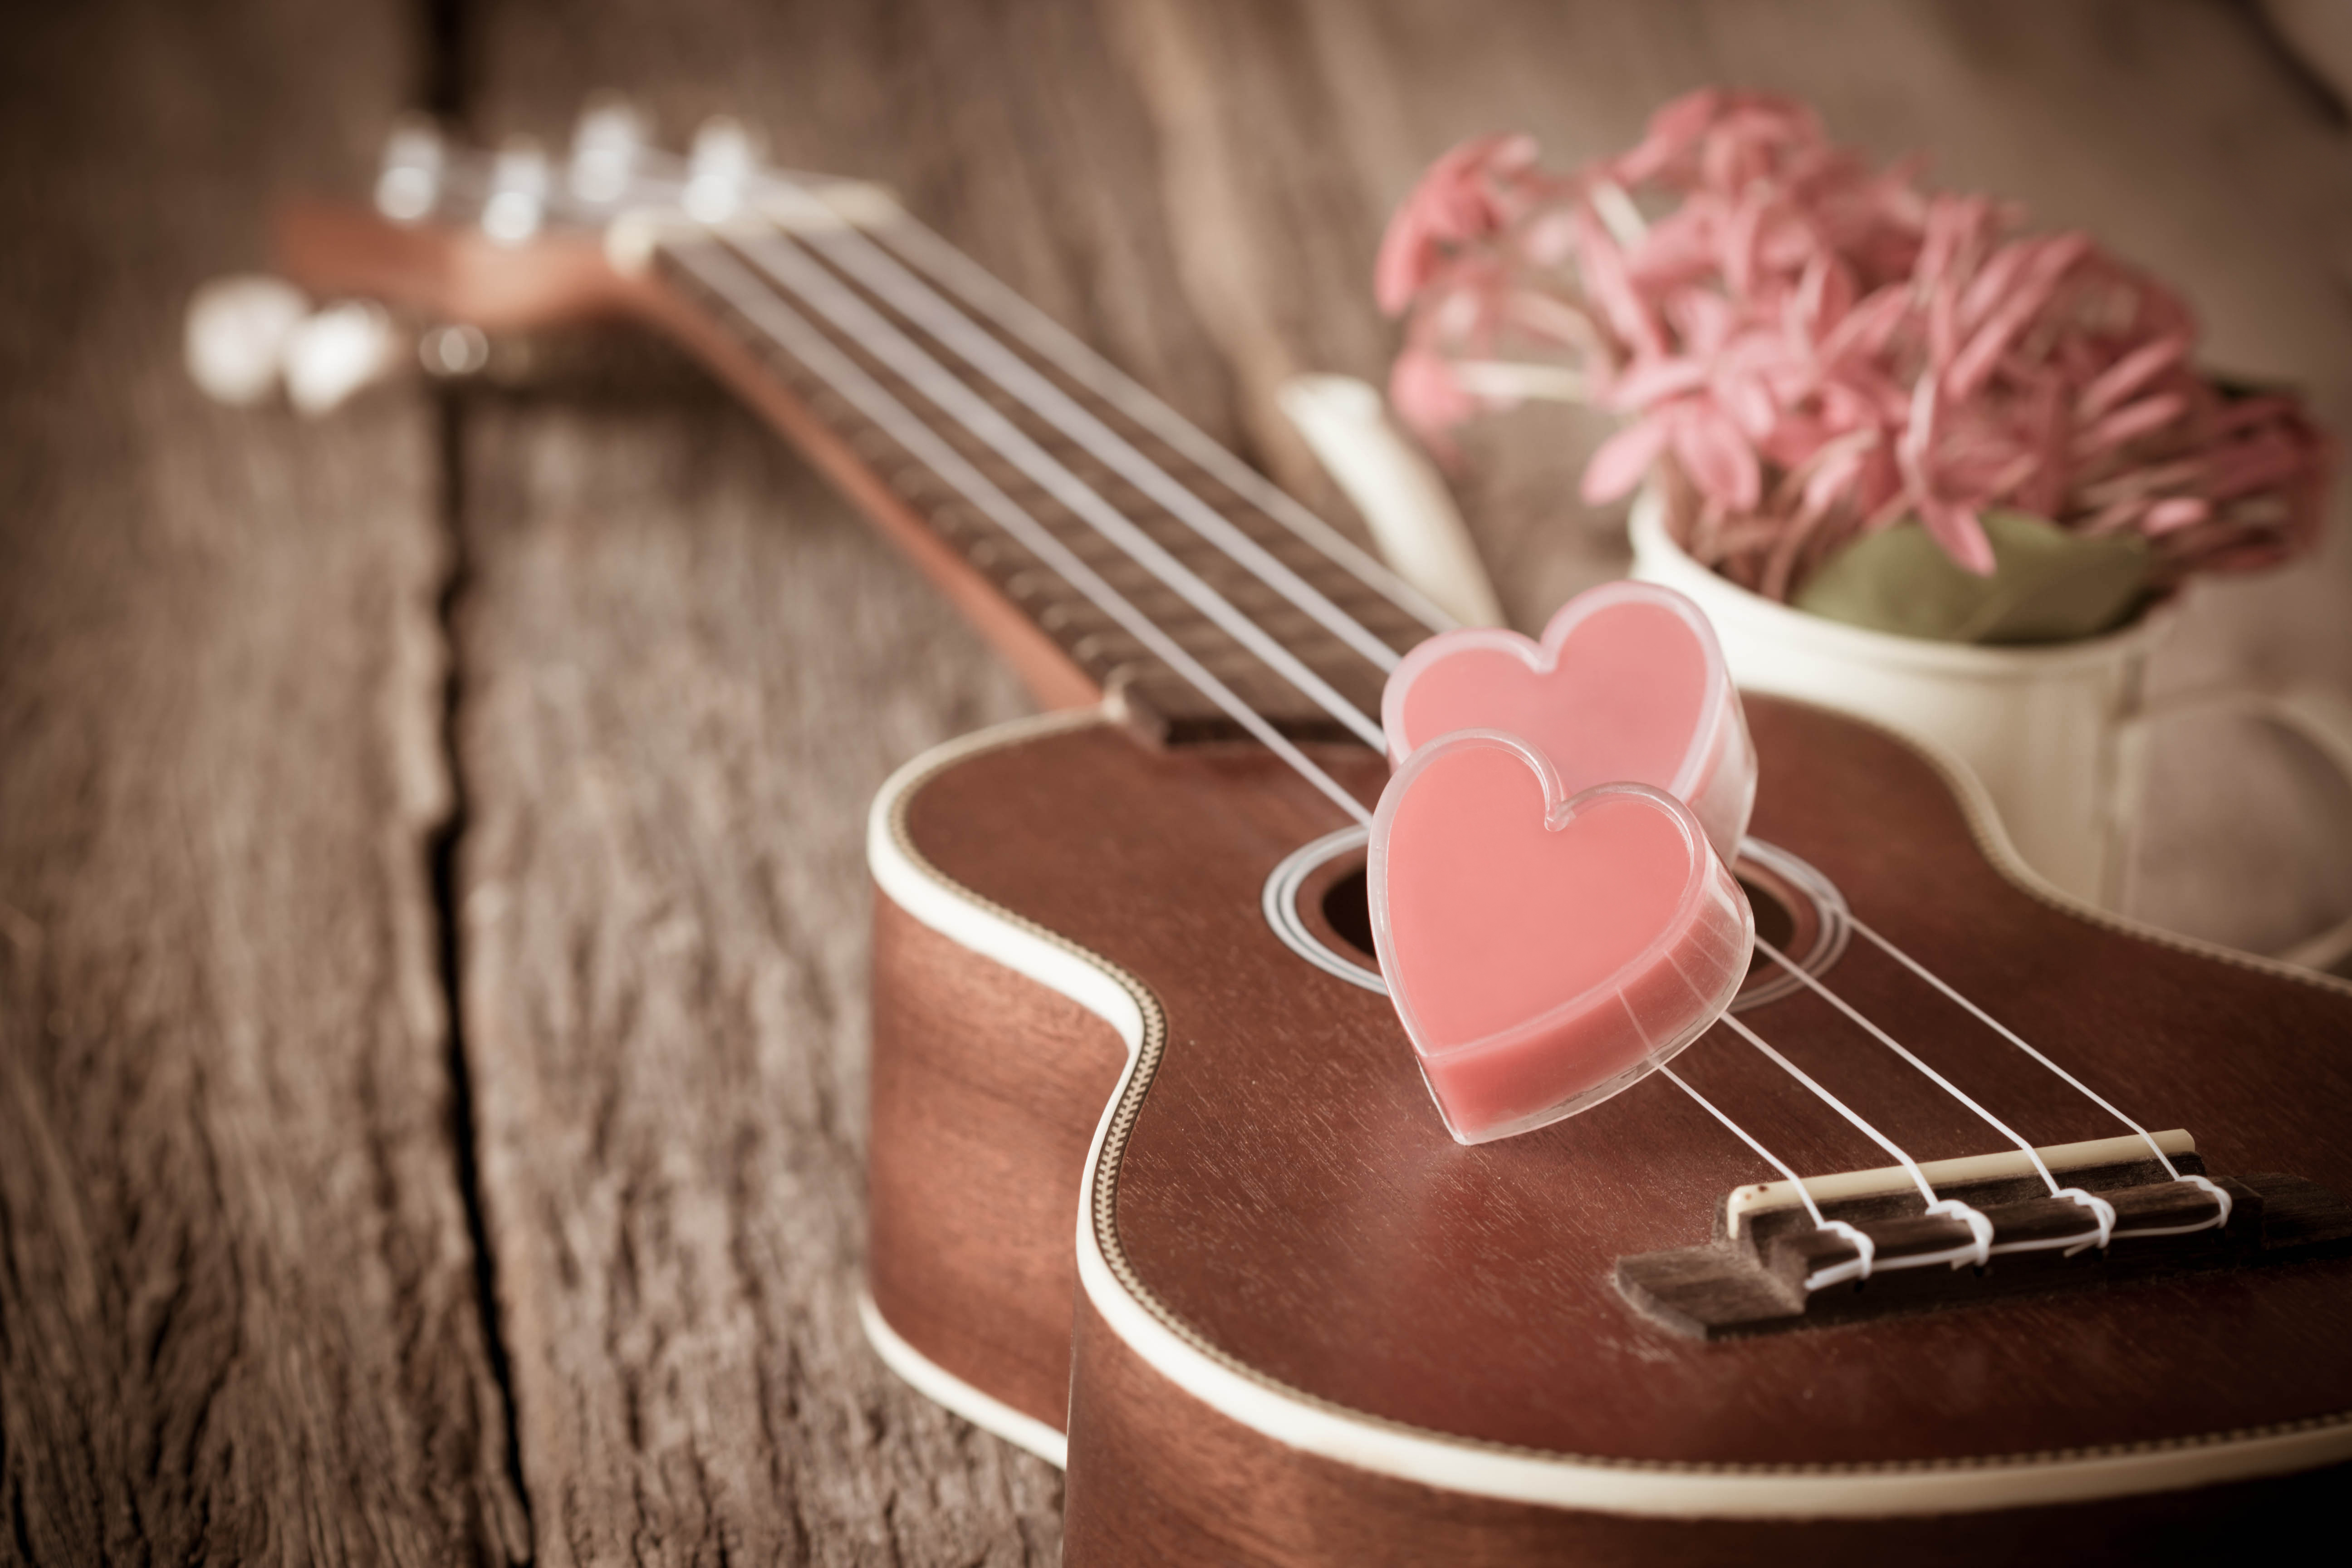 Download wallpaper flowers, heart, guitar, love, vintage, heart, romantic,  section mood in resolution 5184x3456